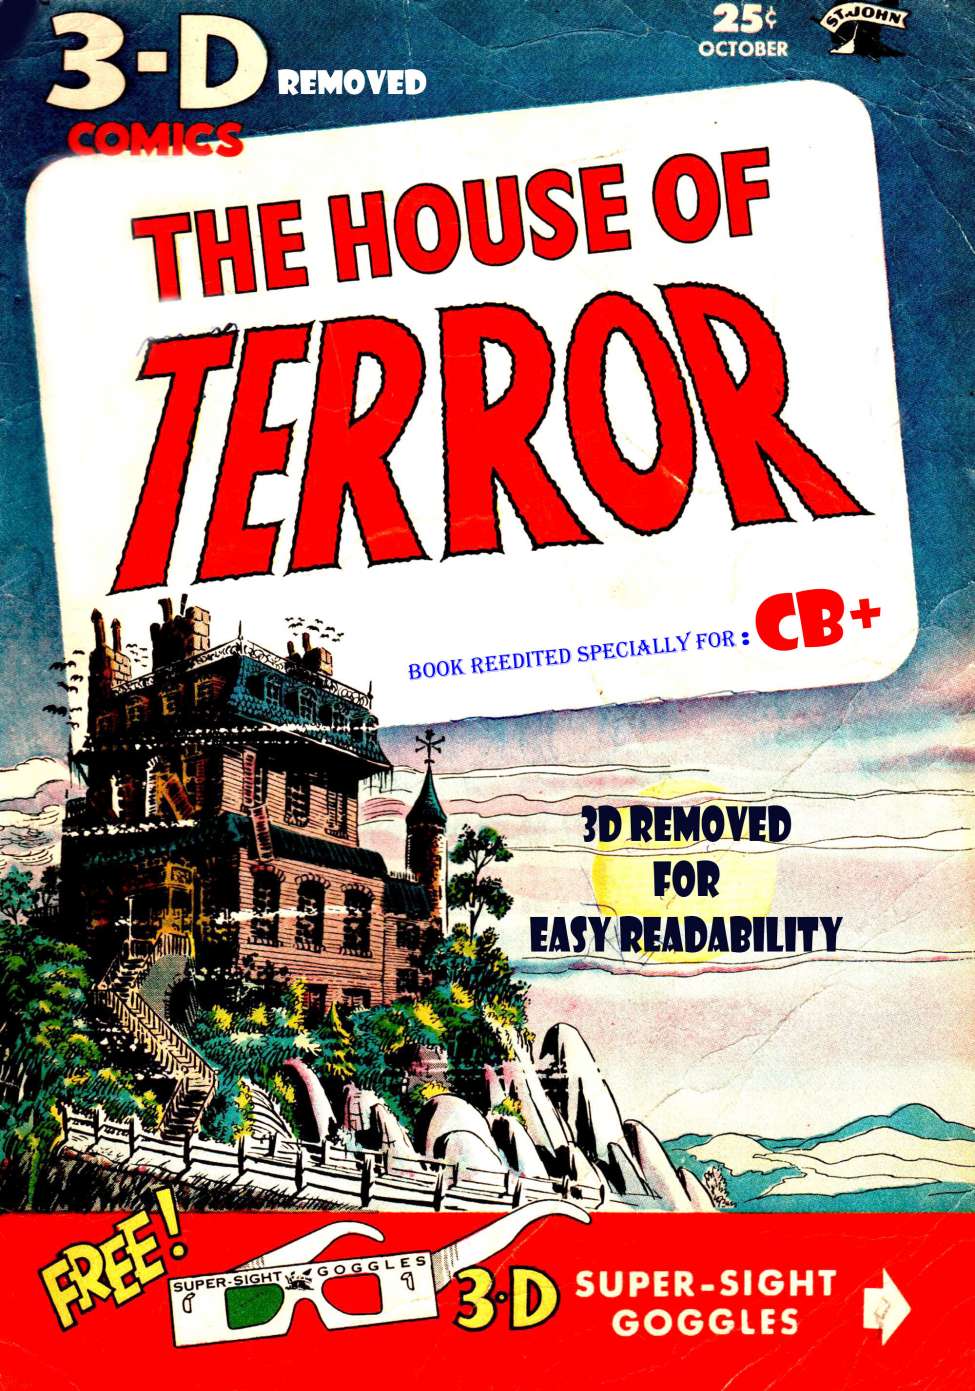 Book Cover For House of Terror 1 (With 3D Removed) - Version 5